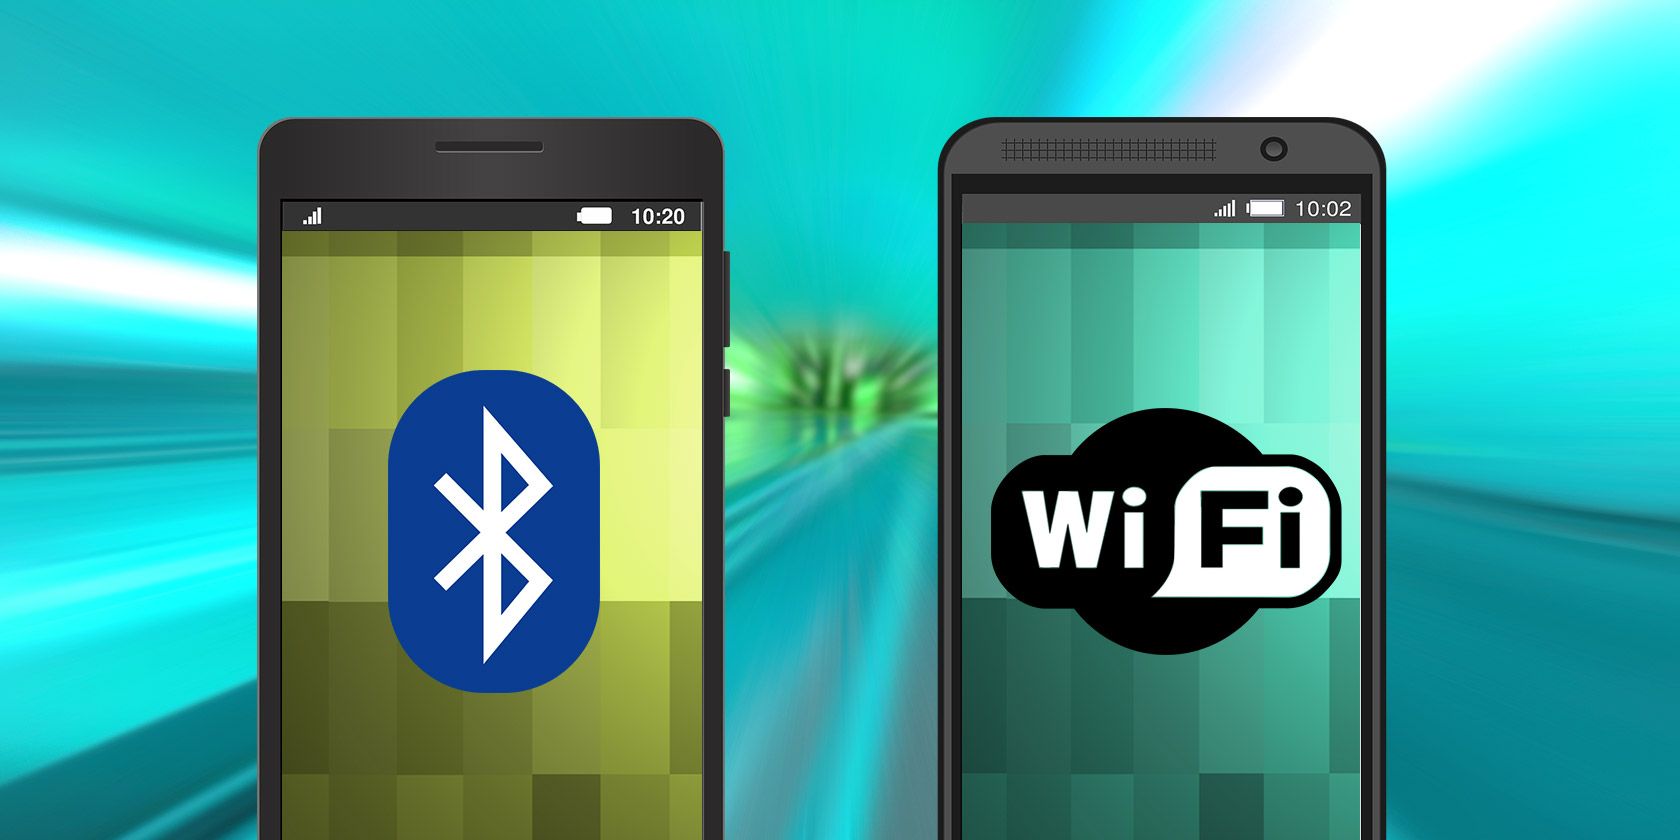 wifi vs bluetooth for video streaming